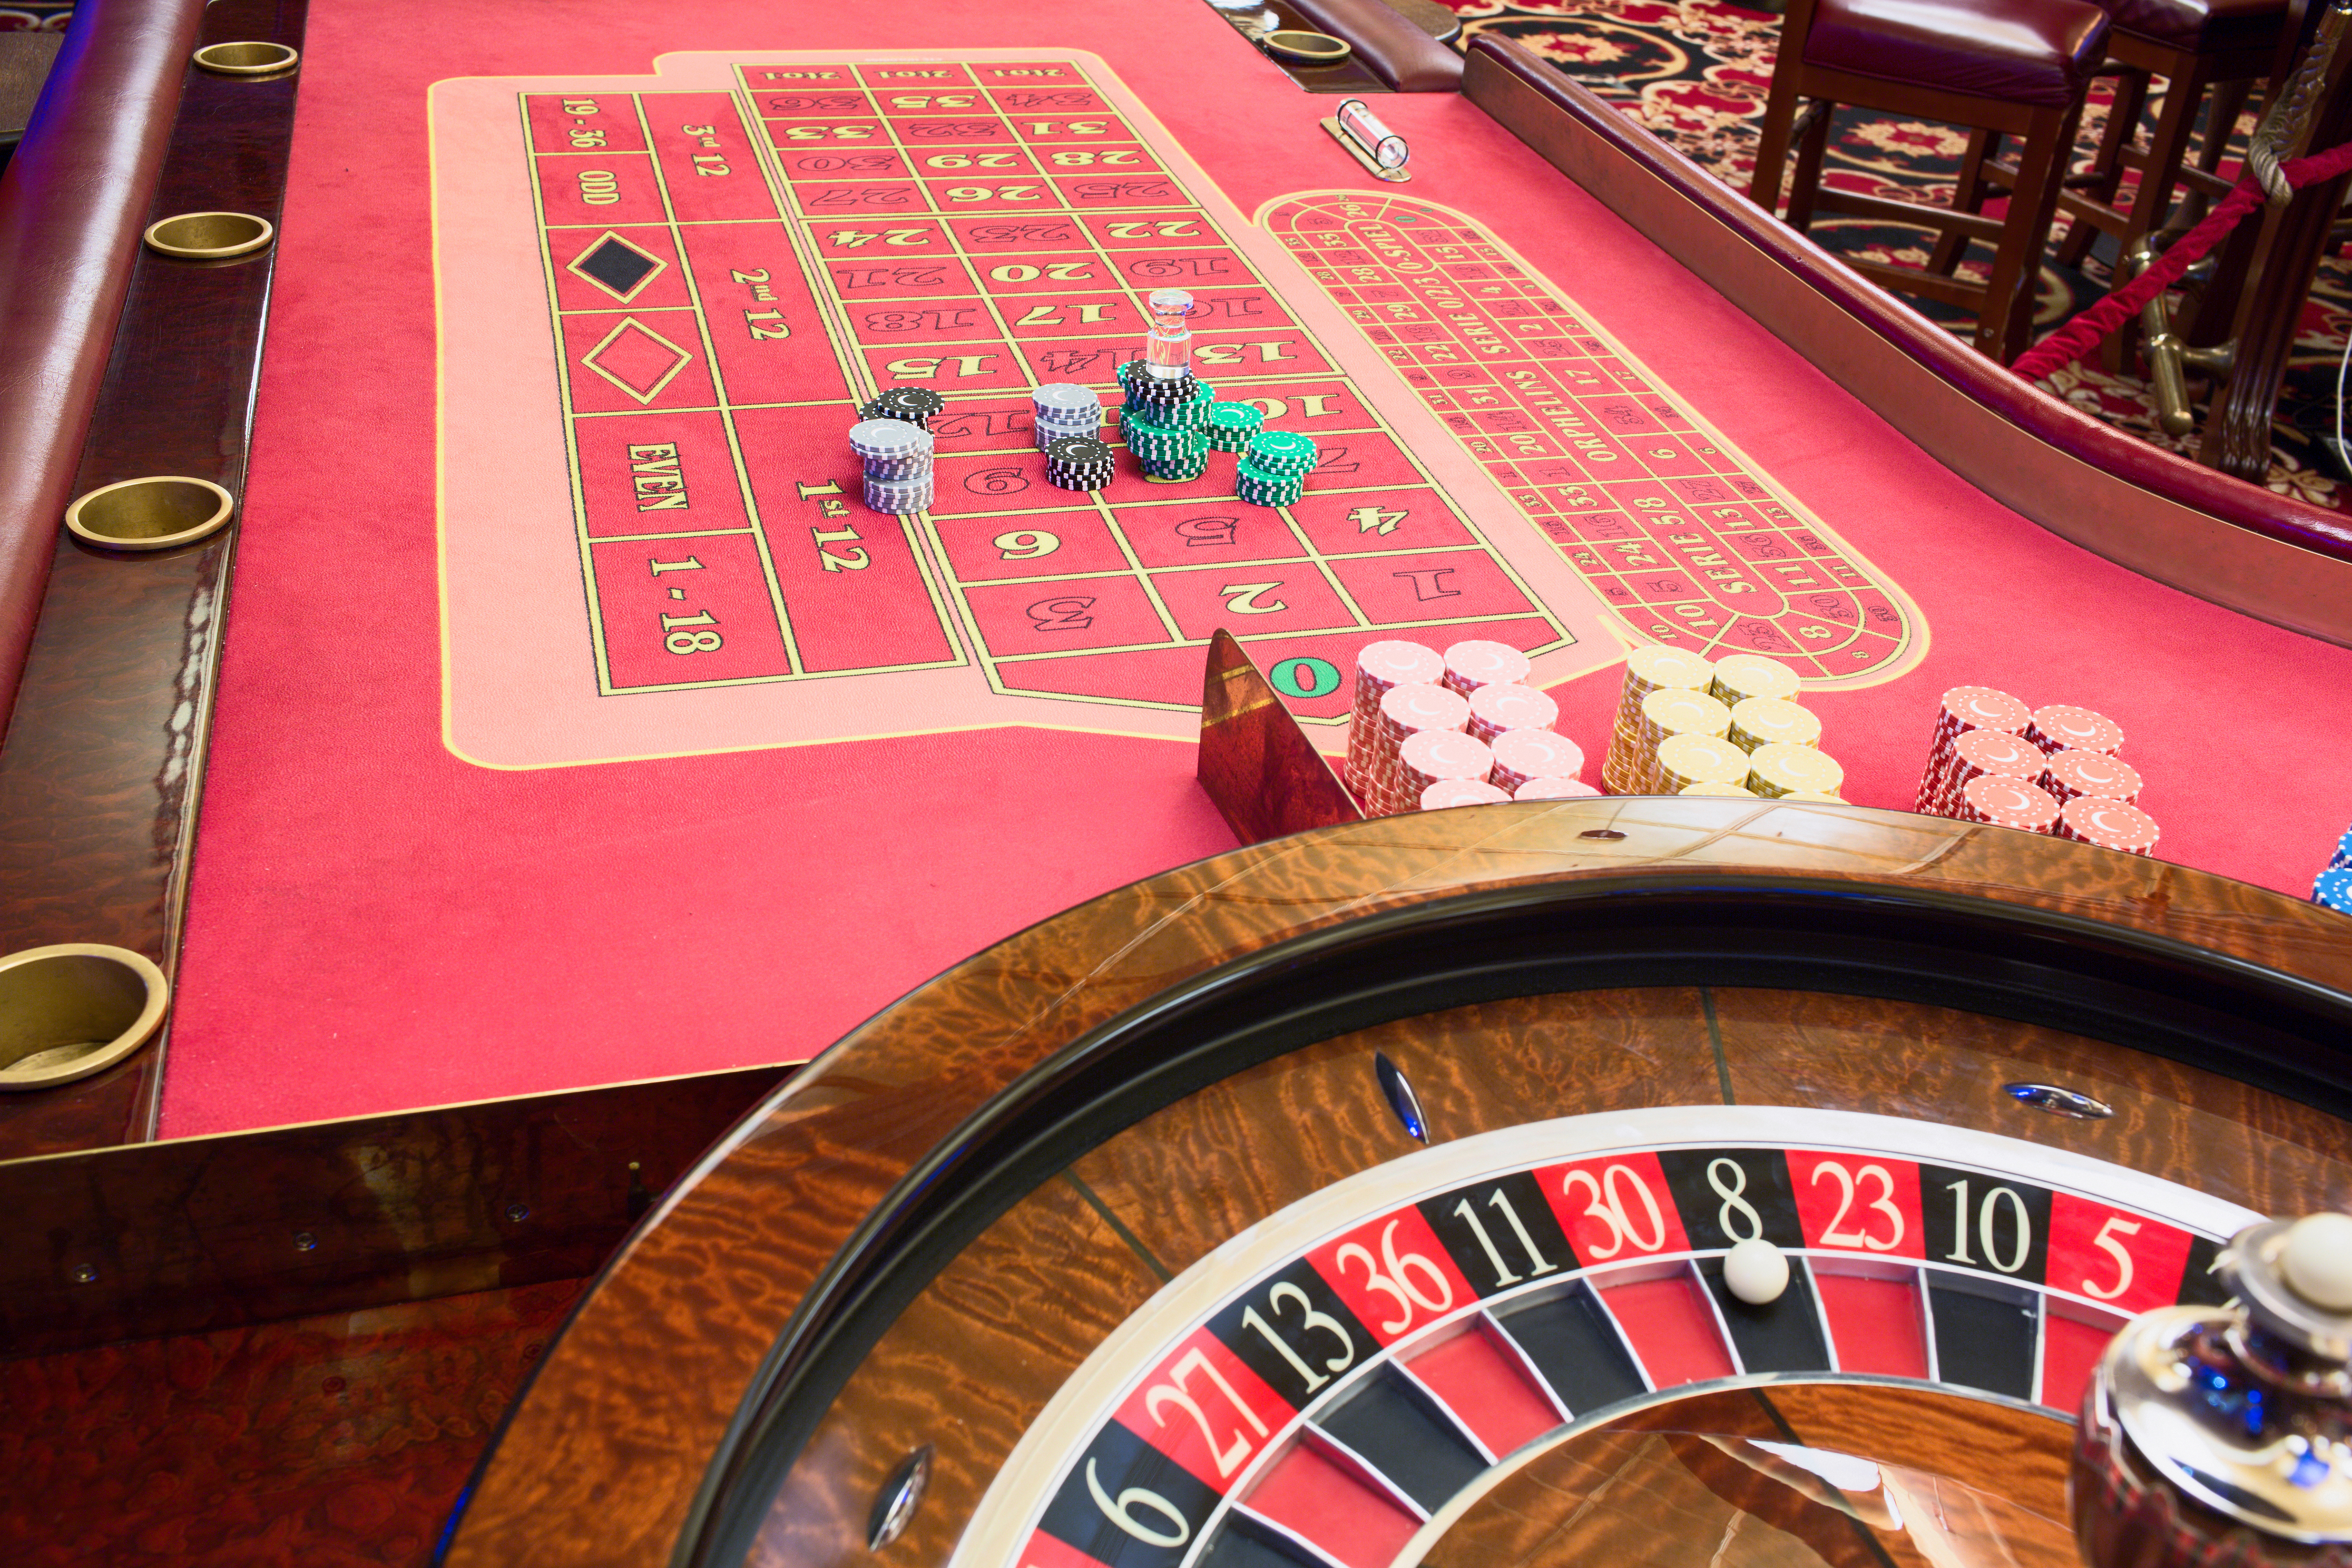 Image of a roulette wheel and table.